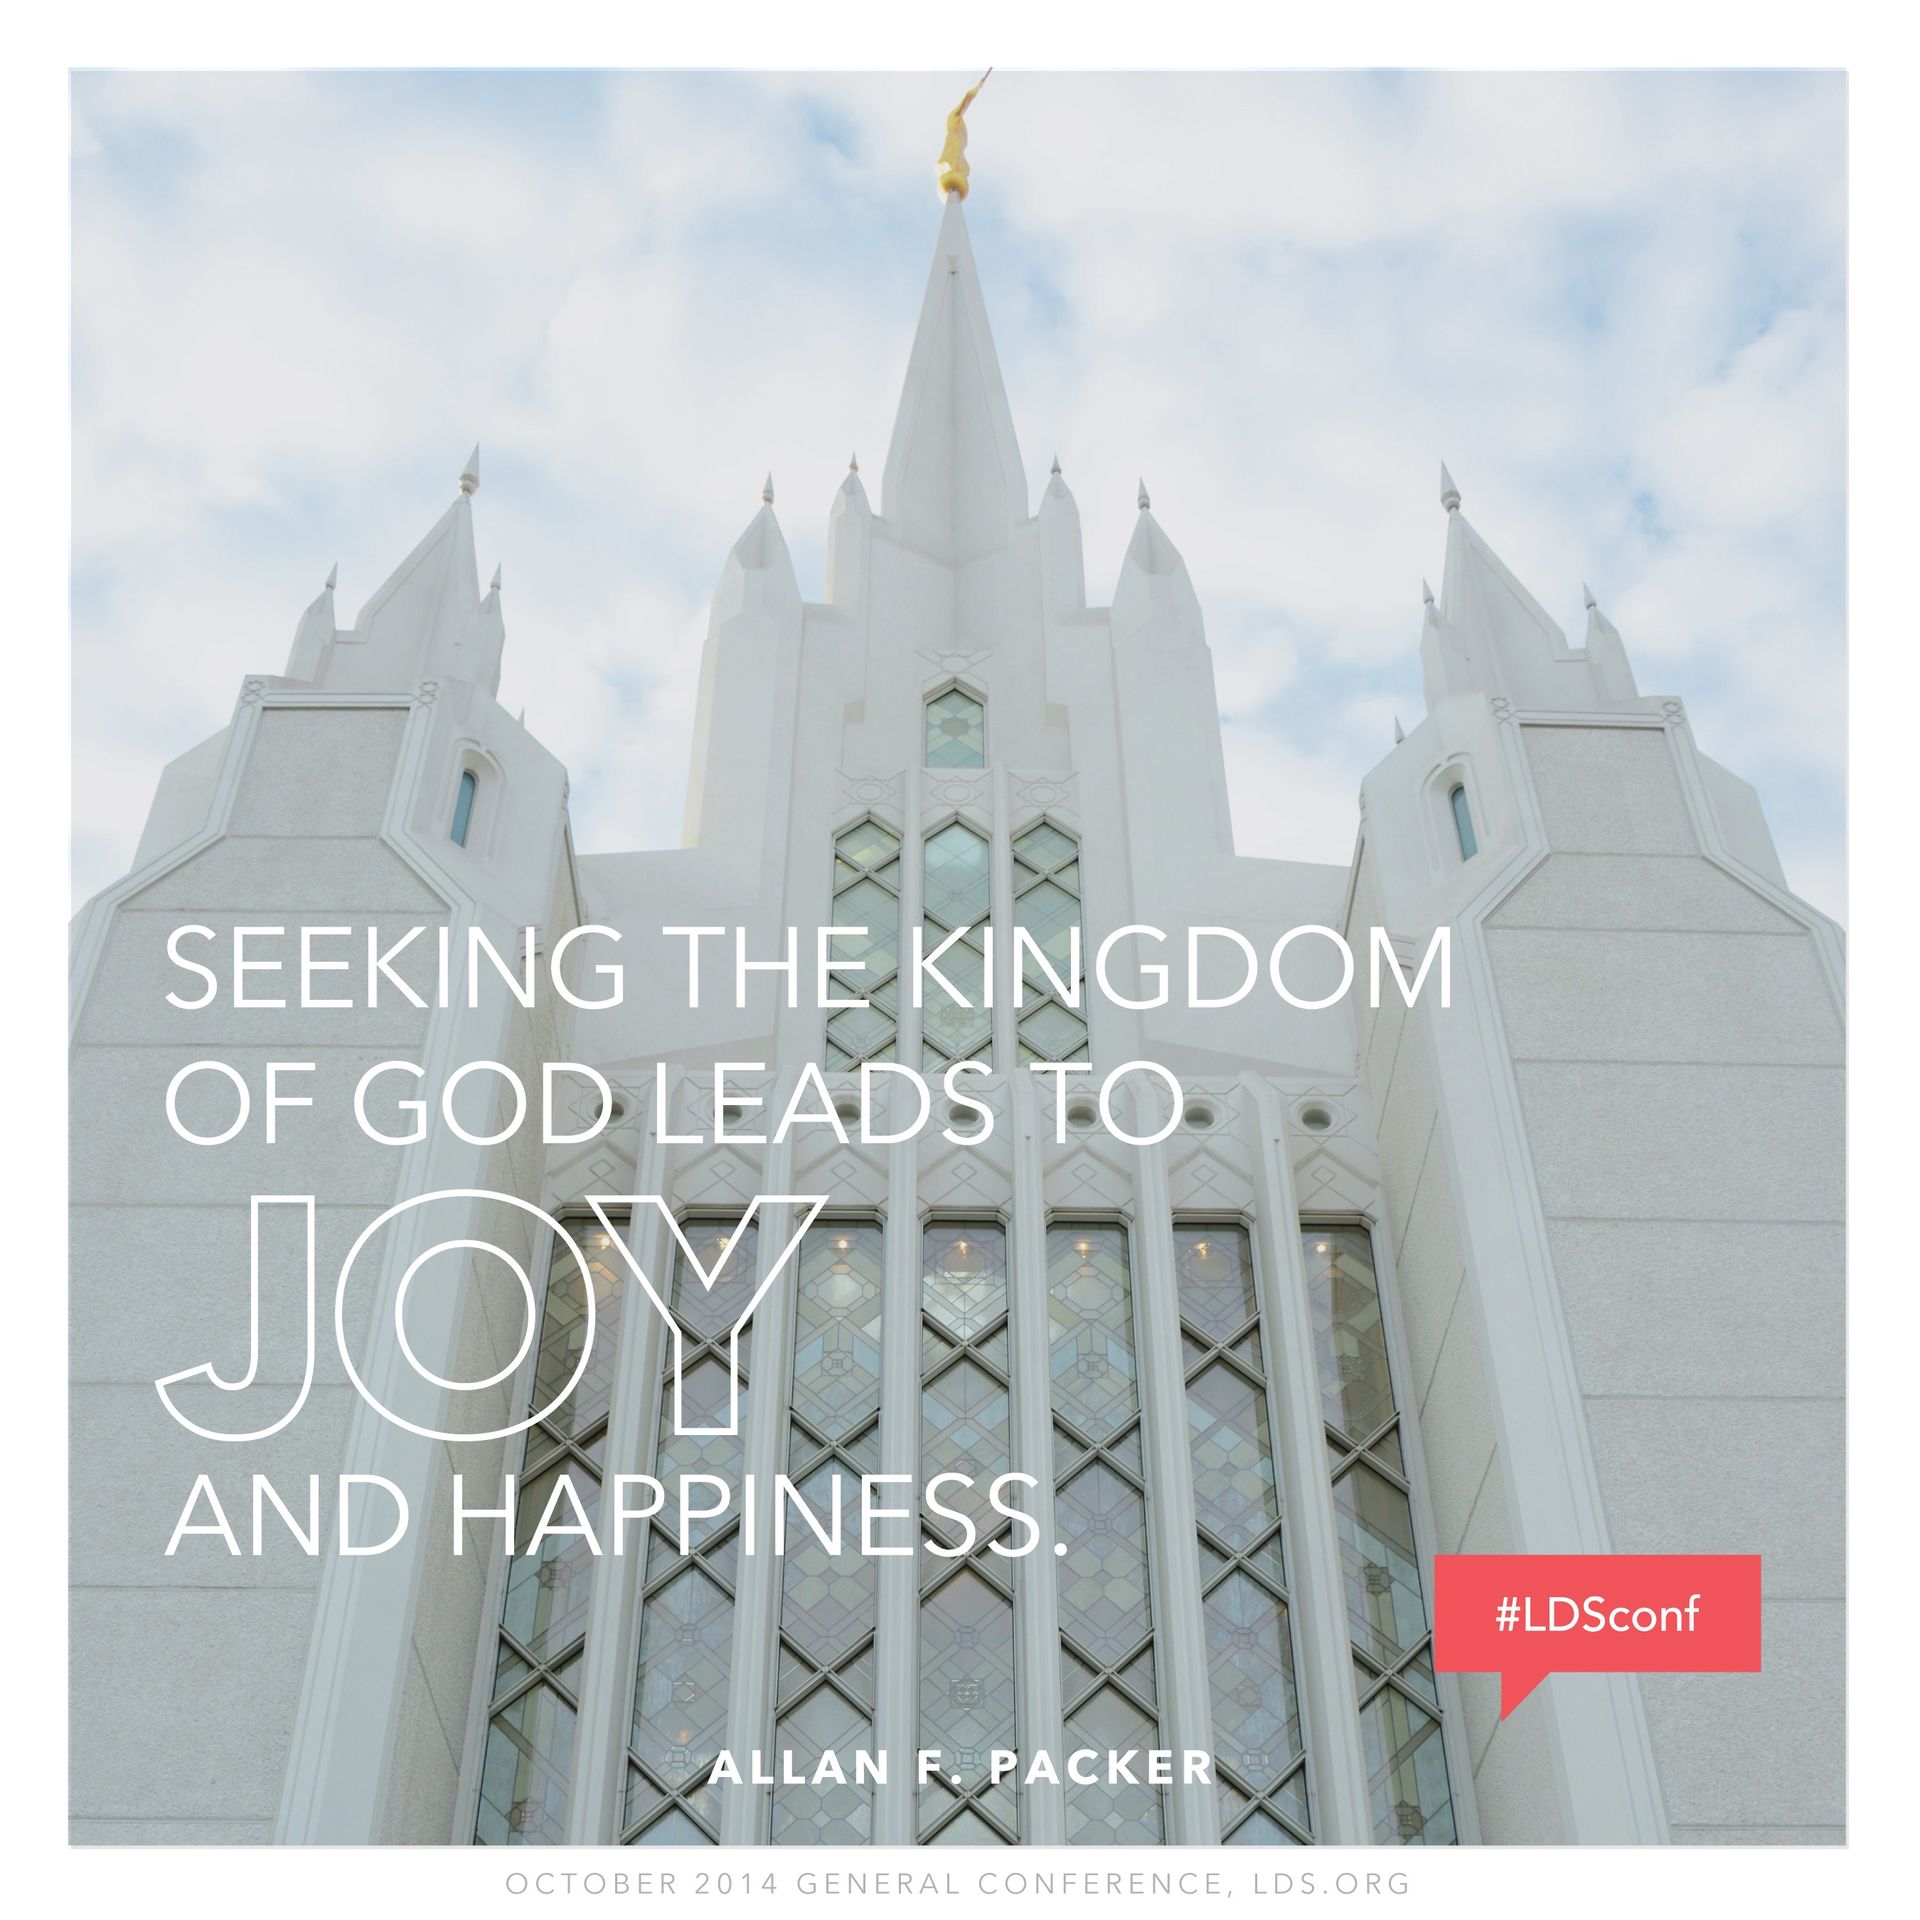 “Seeking the kingdom of God leads to joy and happiness.”—Elder Allan F. Packer, “The Book” © undefined ipCode 1.